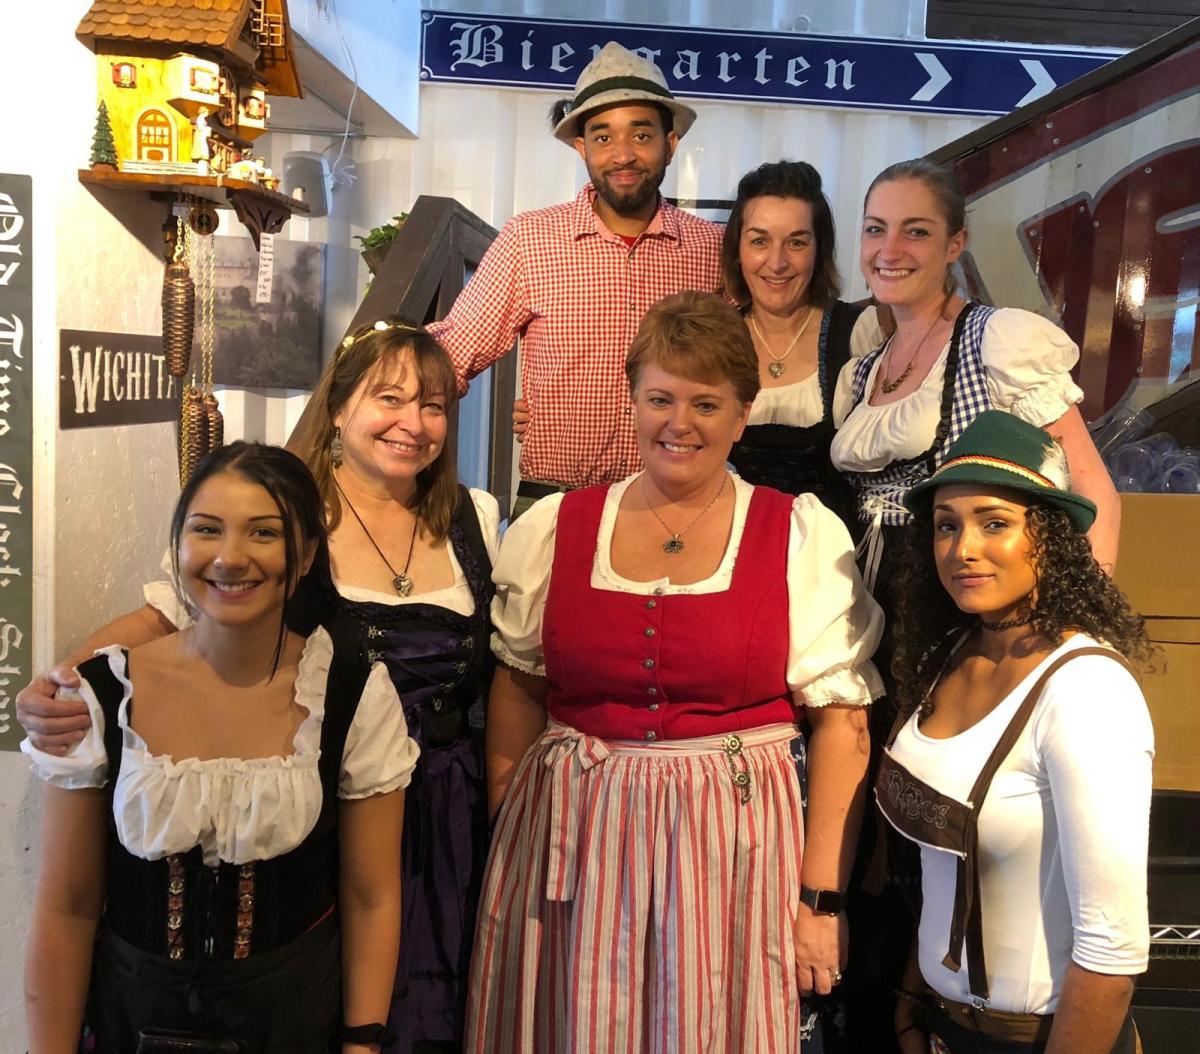 A group of people pose for a photo at Prost's Oktoberfest